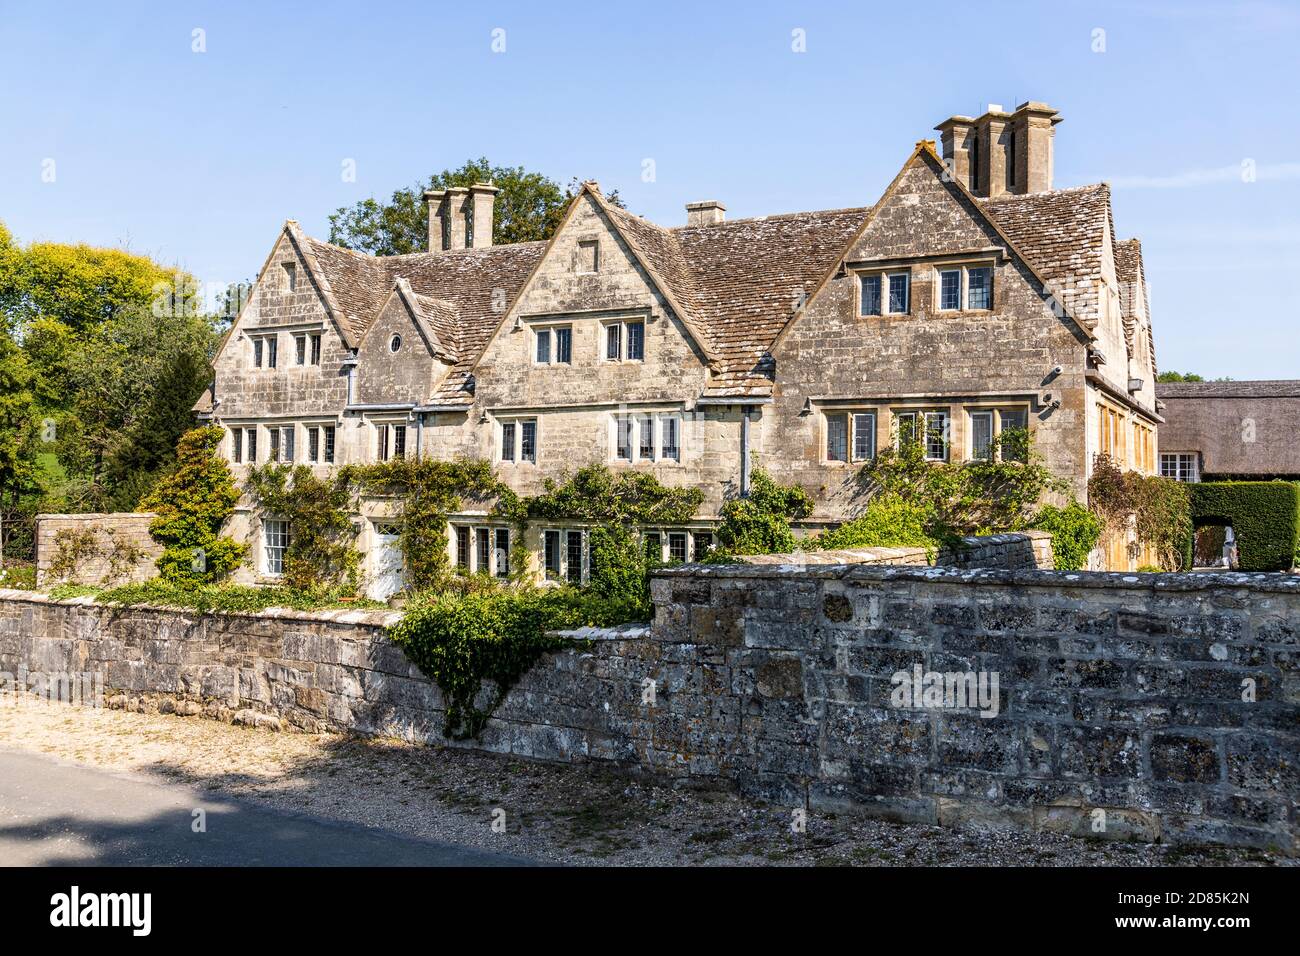 Holcombe House dating back to the late 16th century at Holcombe near the Cotswold village of Painswick, Gloucestershire UK Stock Photo